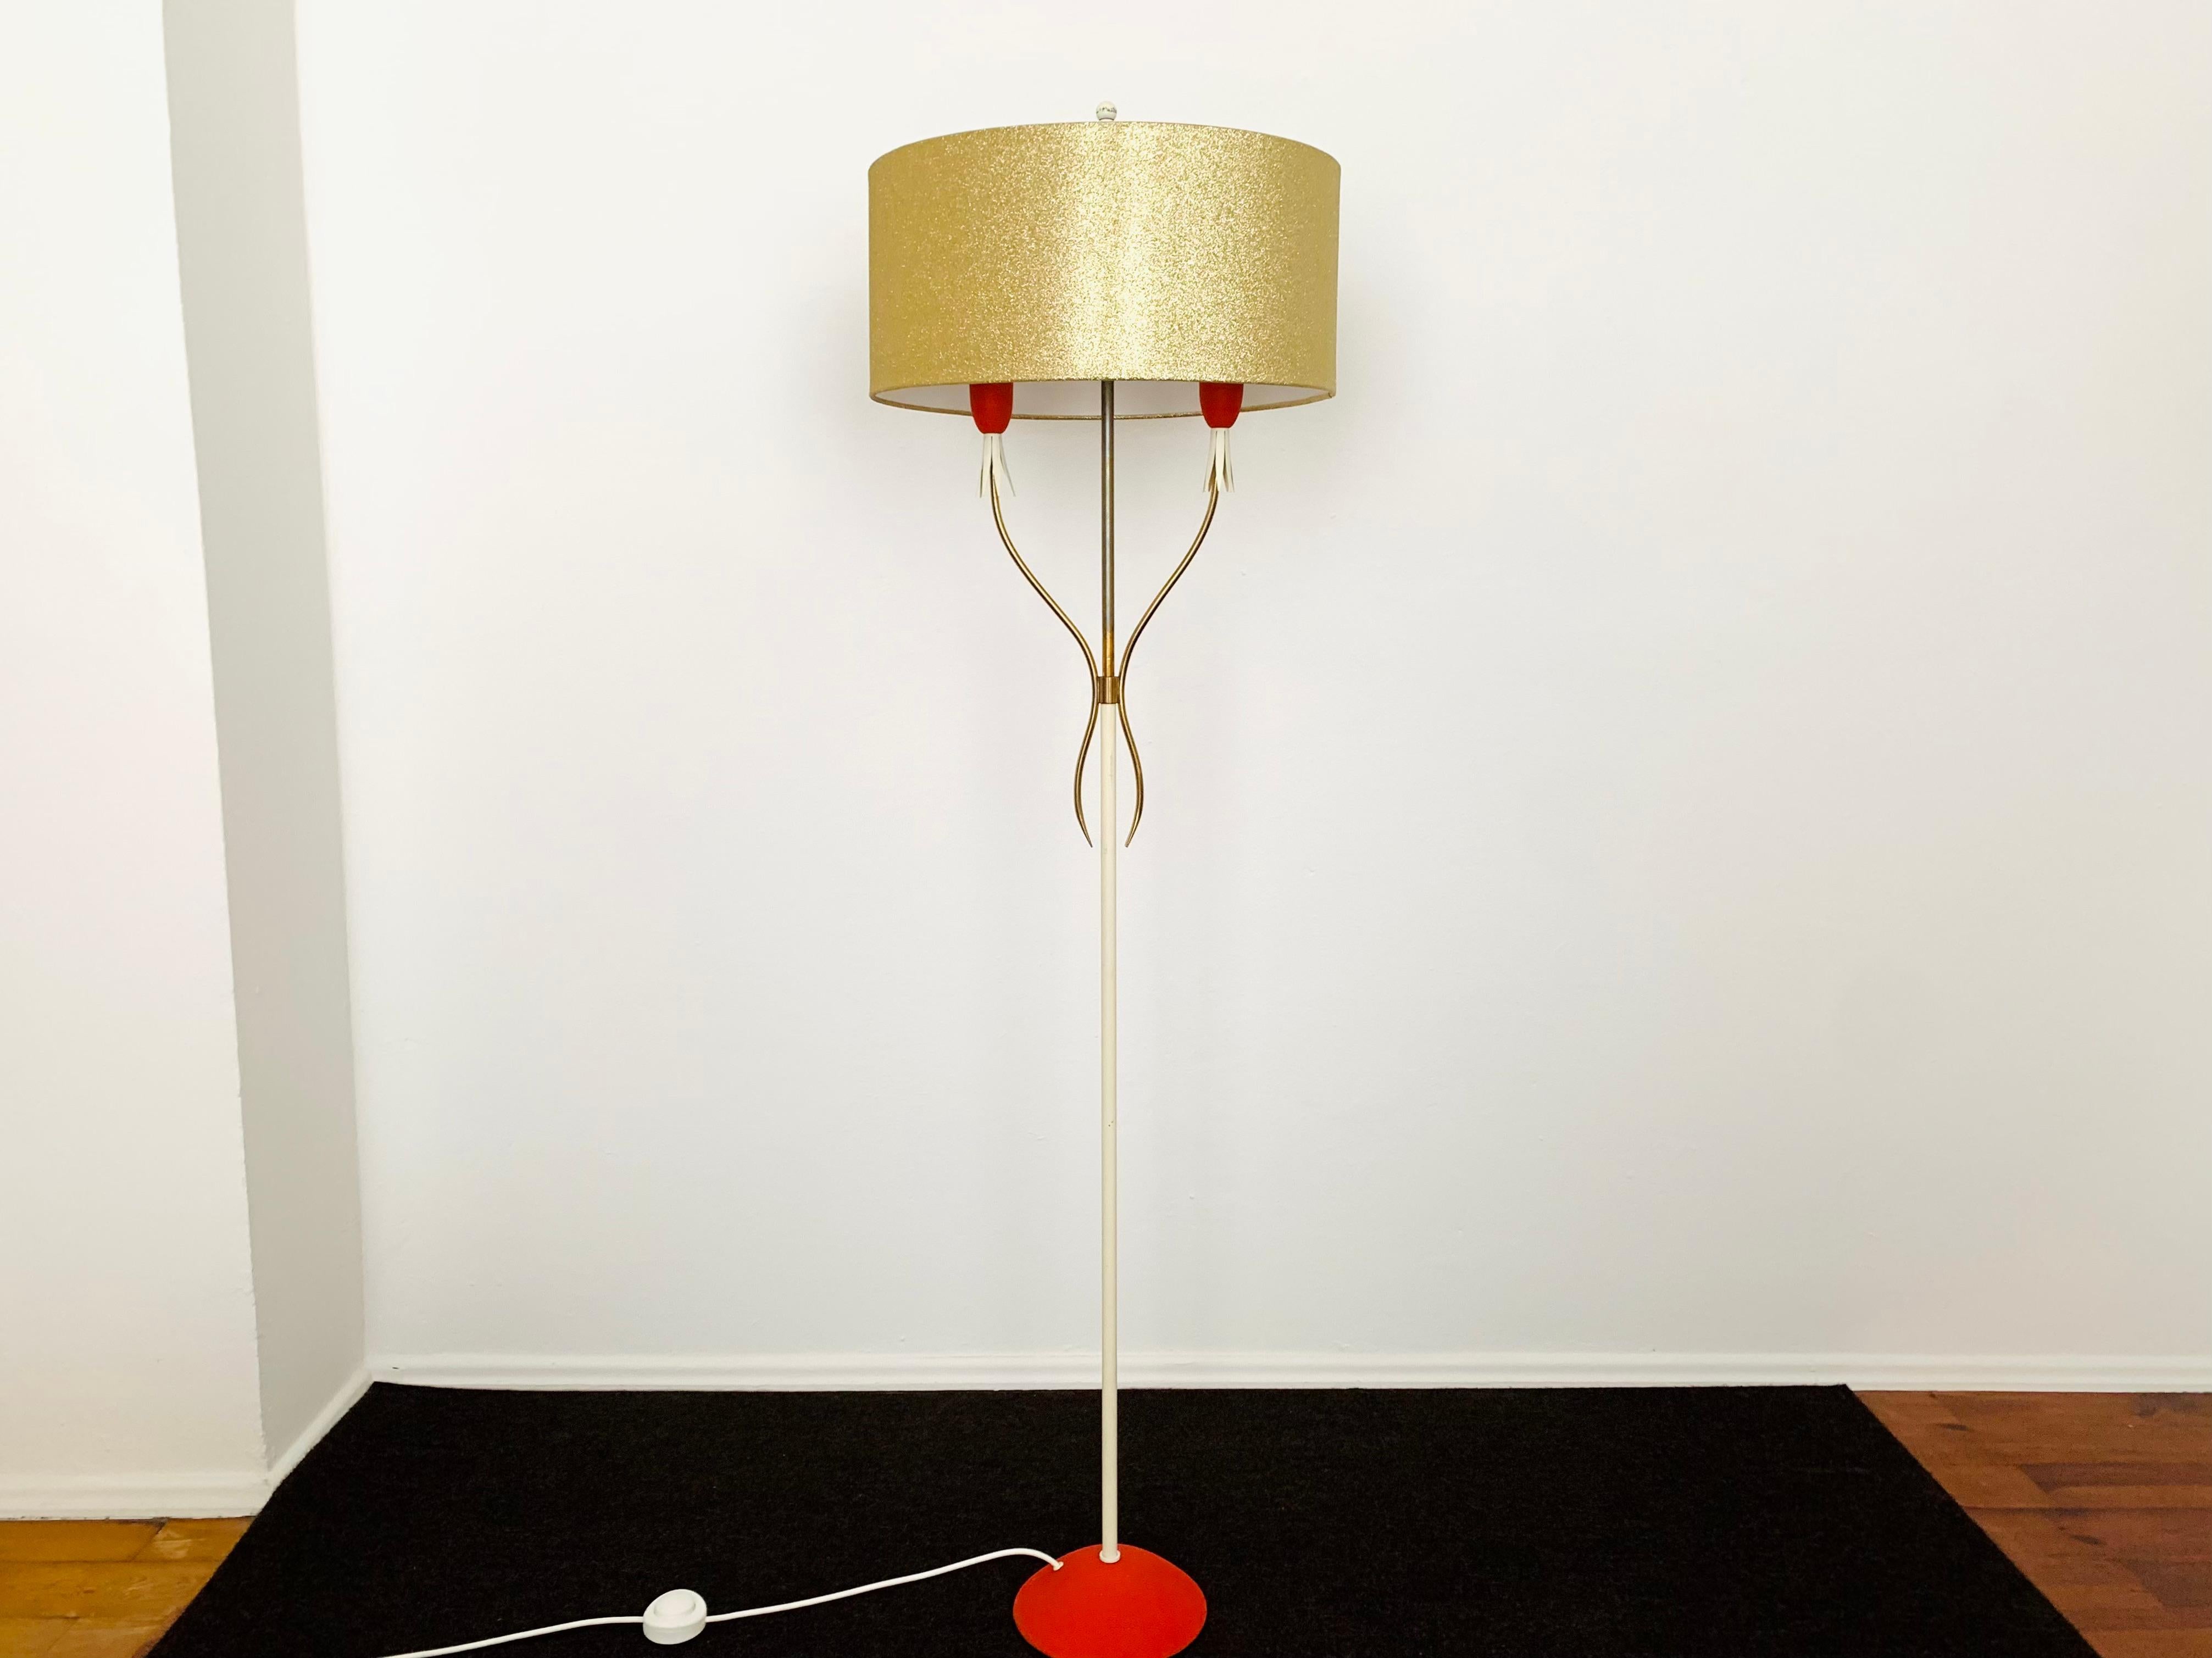 Very nice Italian floor lamp from the 1950s.
Great design and high-quality workmanship.
The loving details and the very pleasant lighting effect make the lamp special and a real favorite.

Condition:

Very good vintage condition with slight